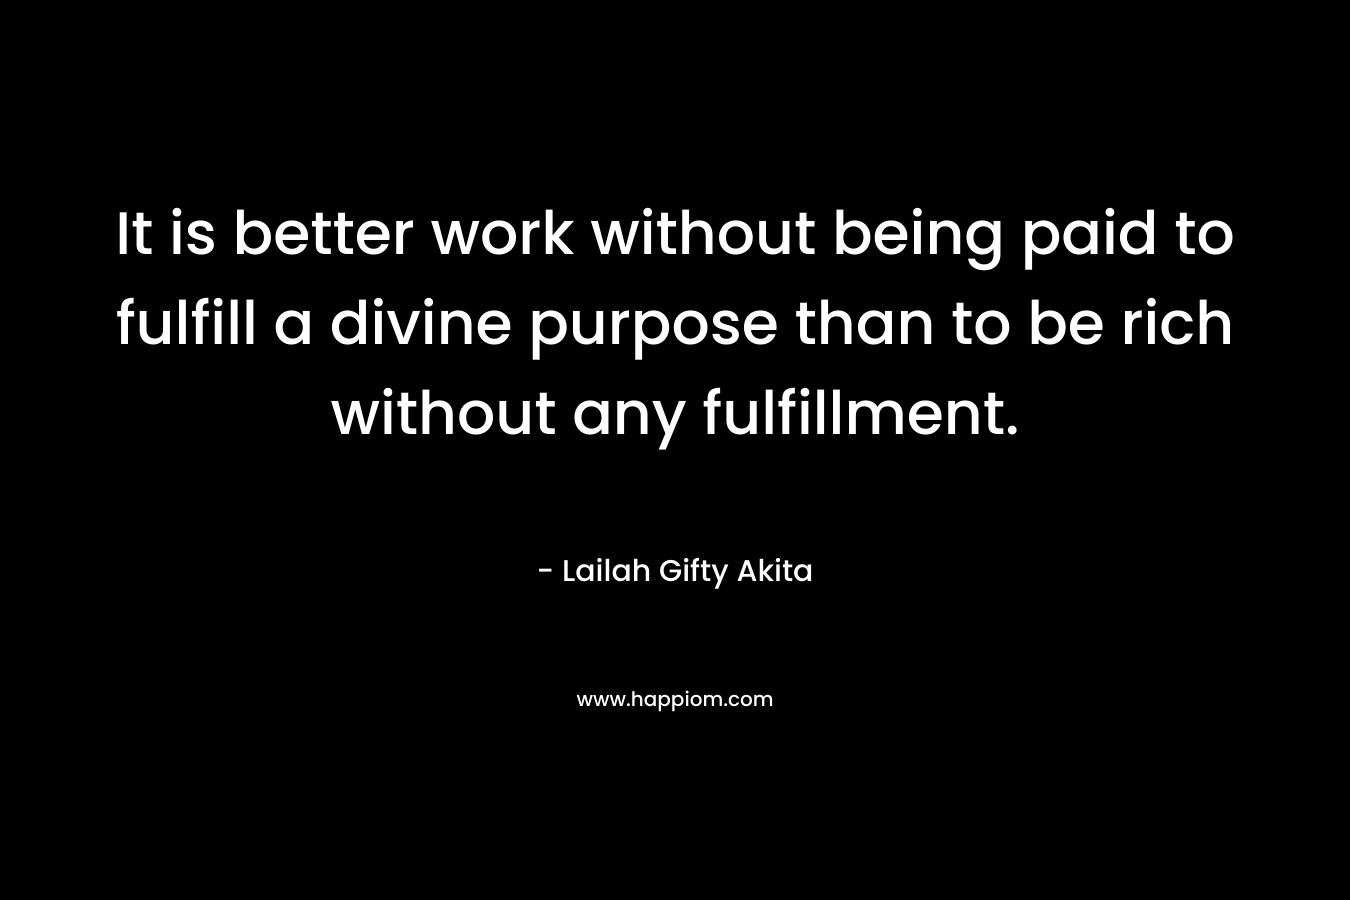 It is better work without being paid to fulfill a divine purpose than to be rich without any fulfillment.